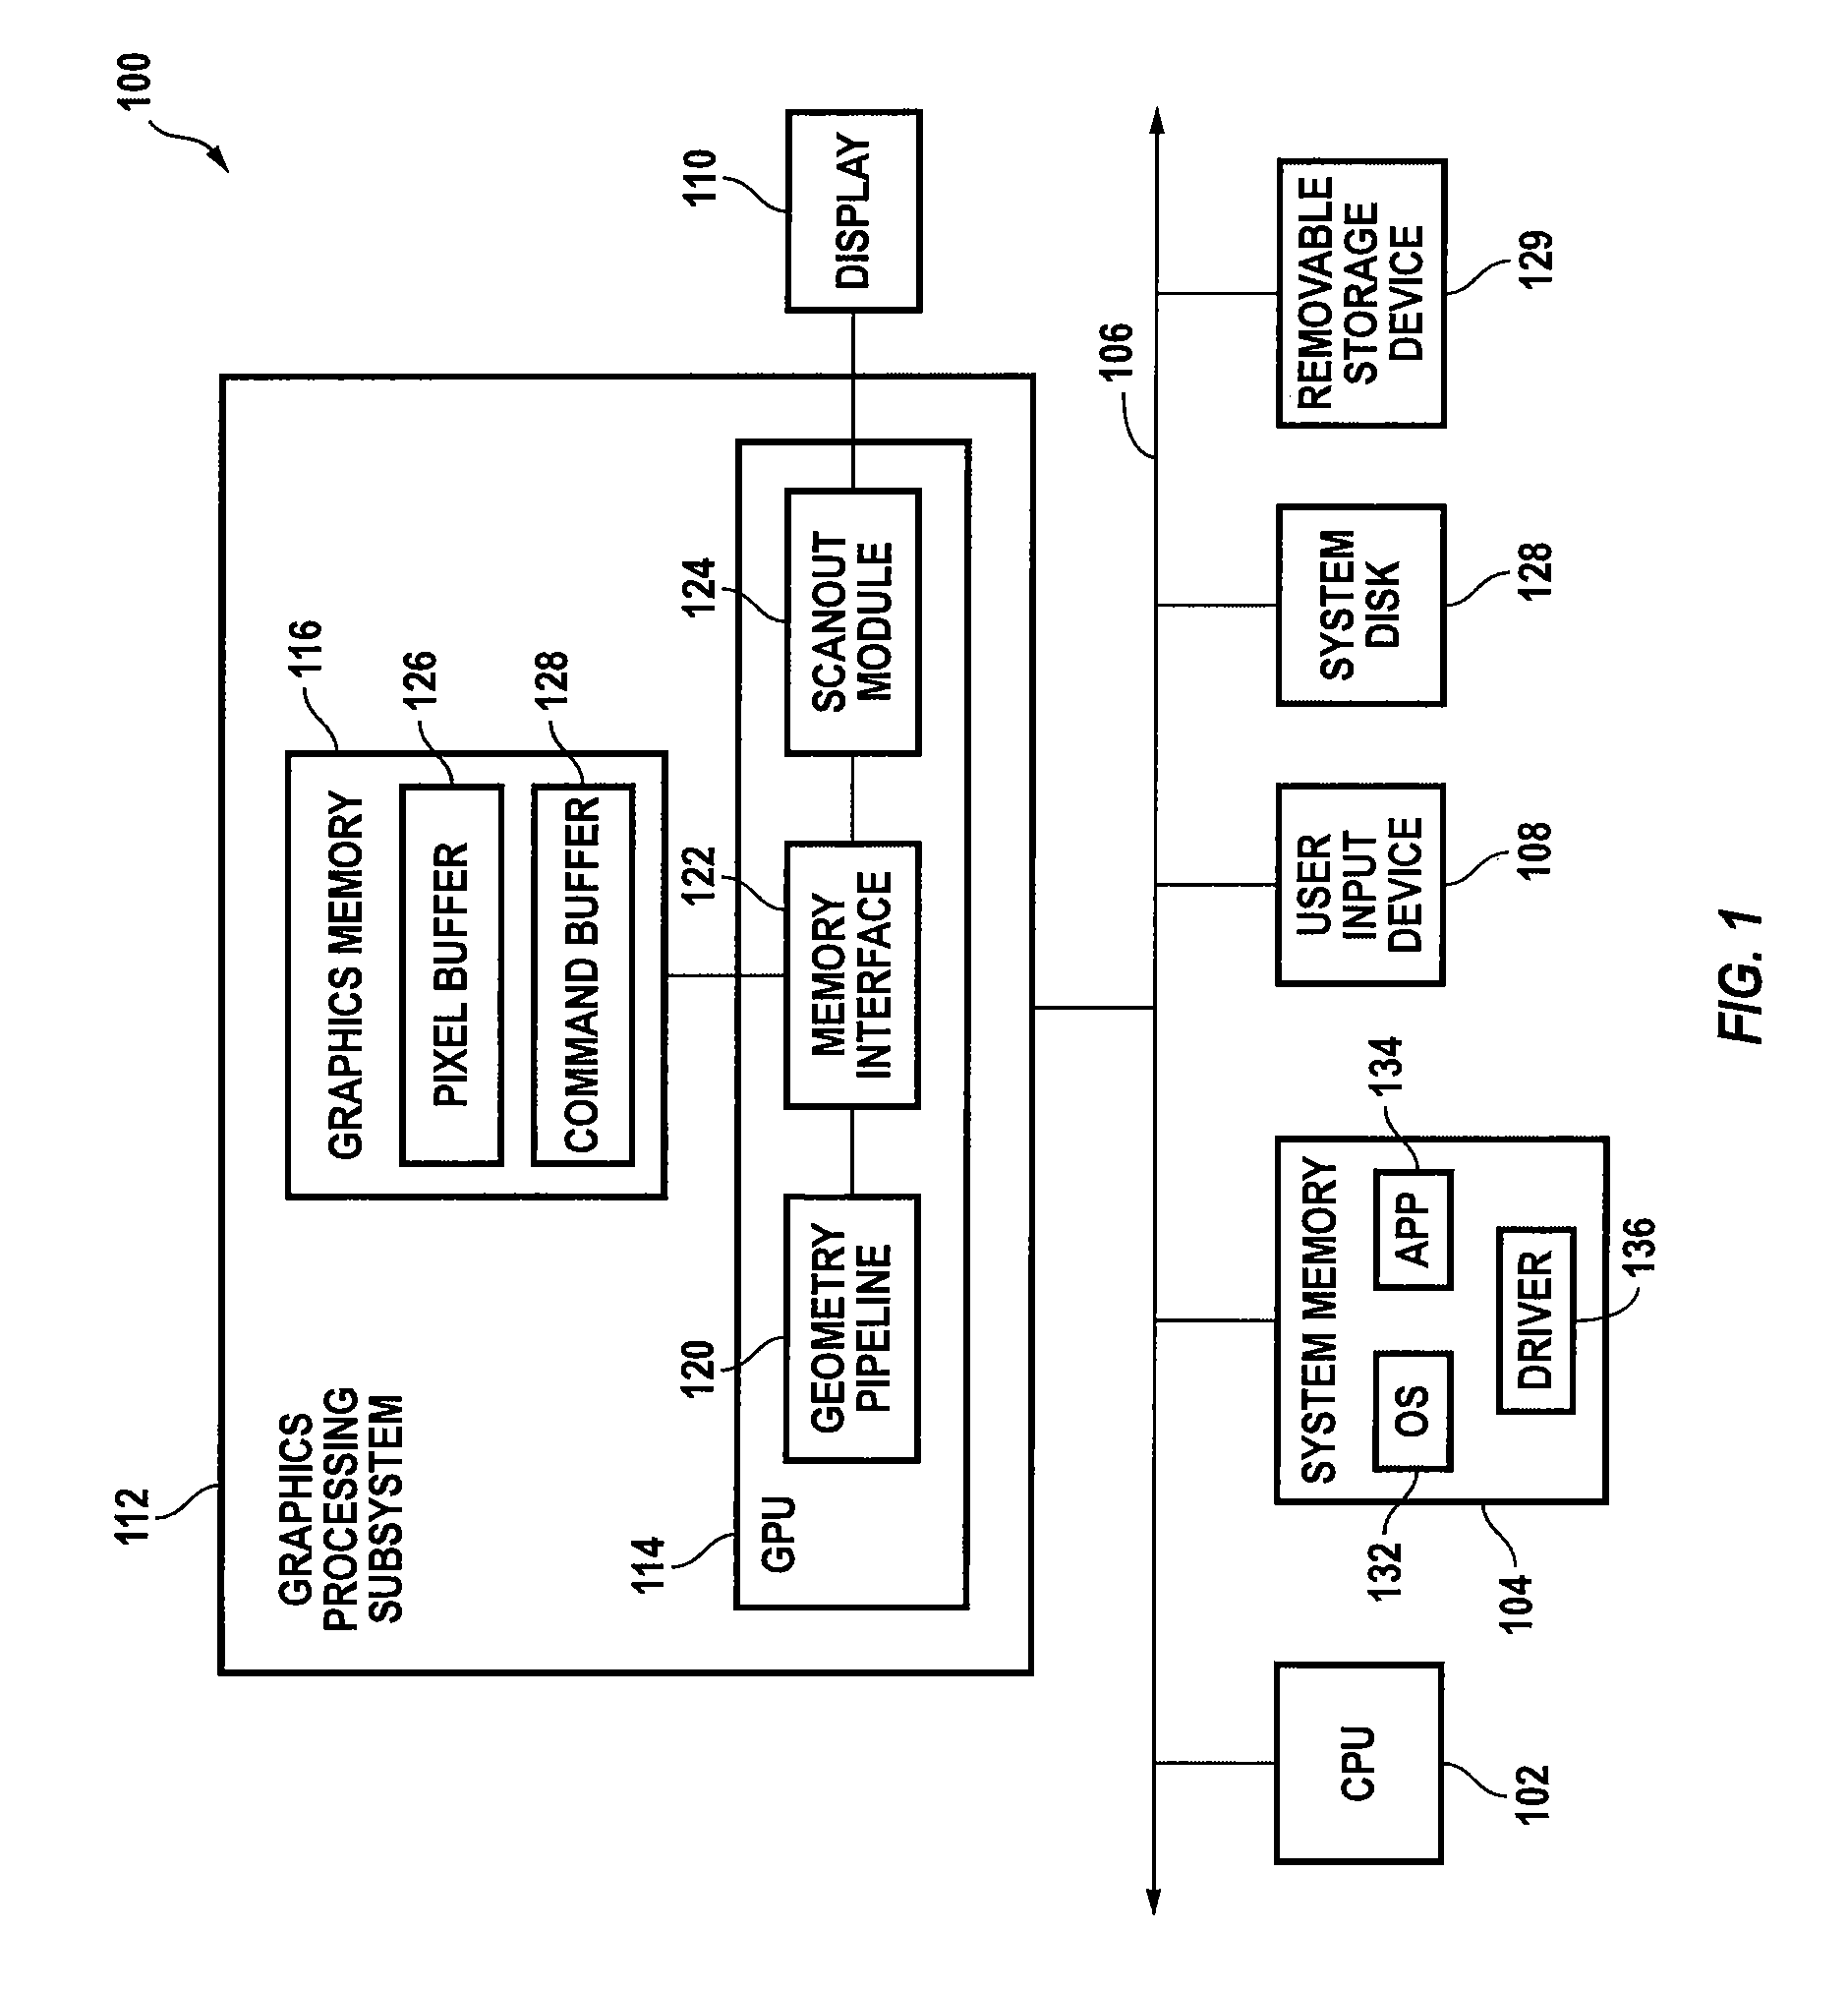 Isochronous pipelined processor with deterministic control